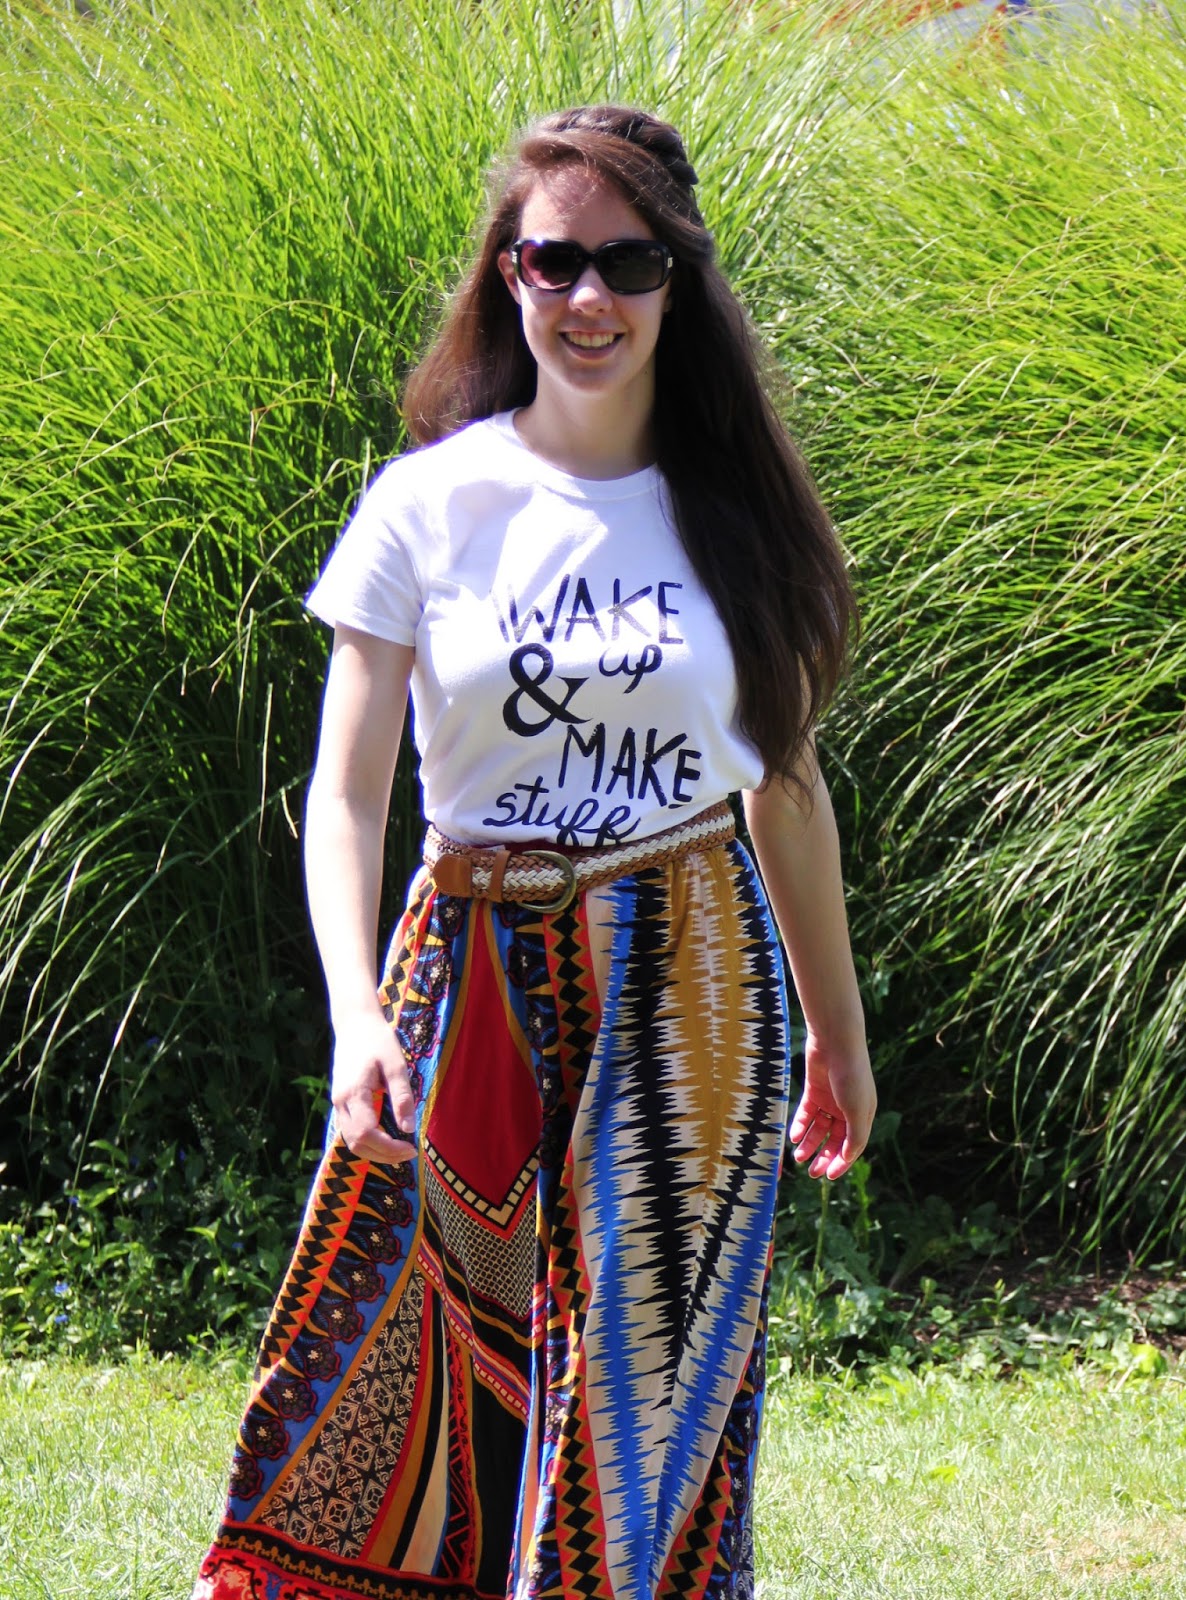 http://www.helloawesomeshop.com/products/6198070-wake-up-make-stuff-ladies-graphic-tee